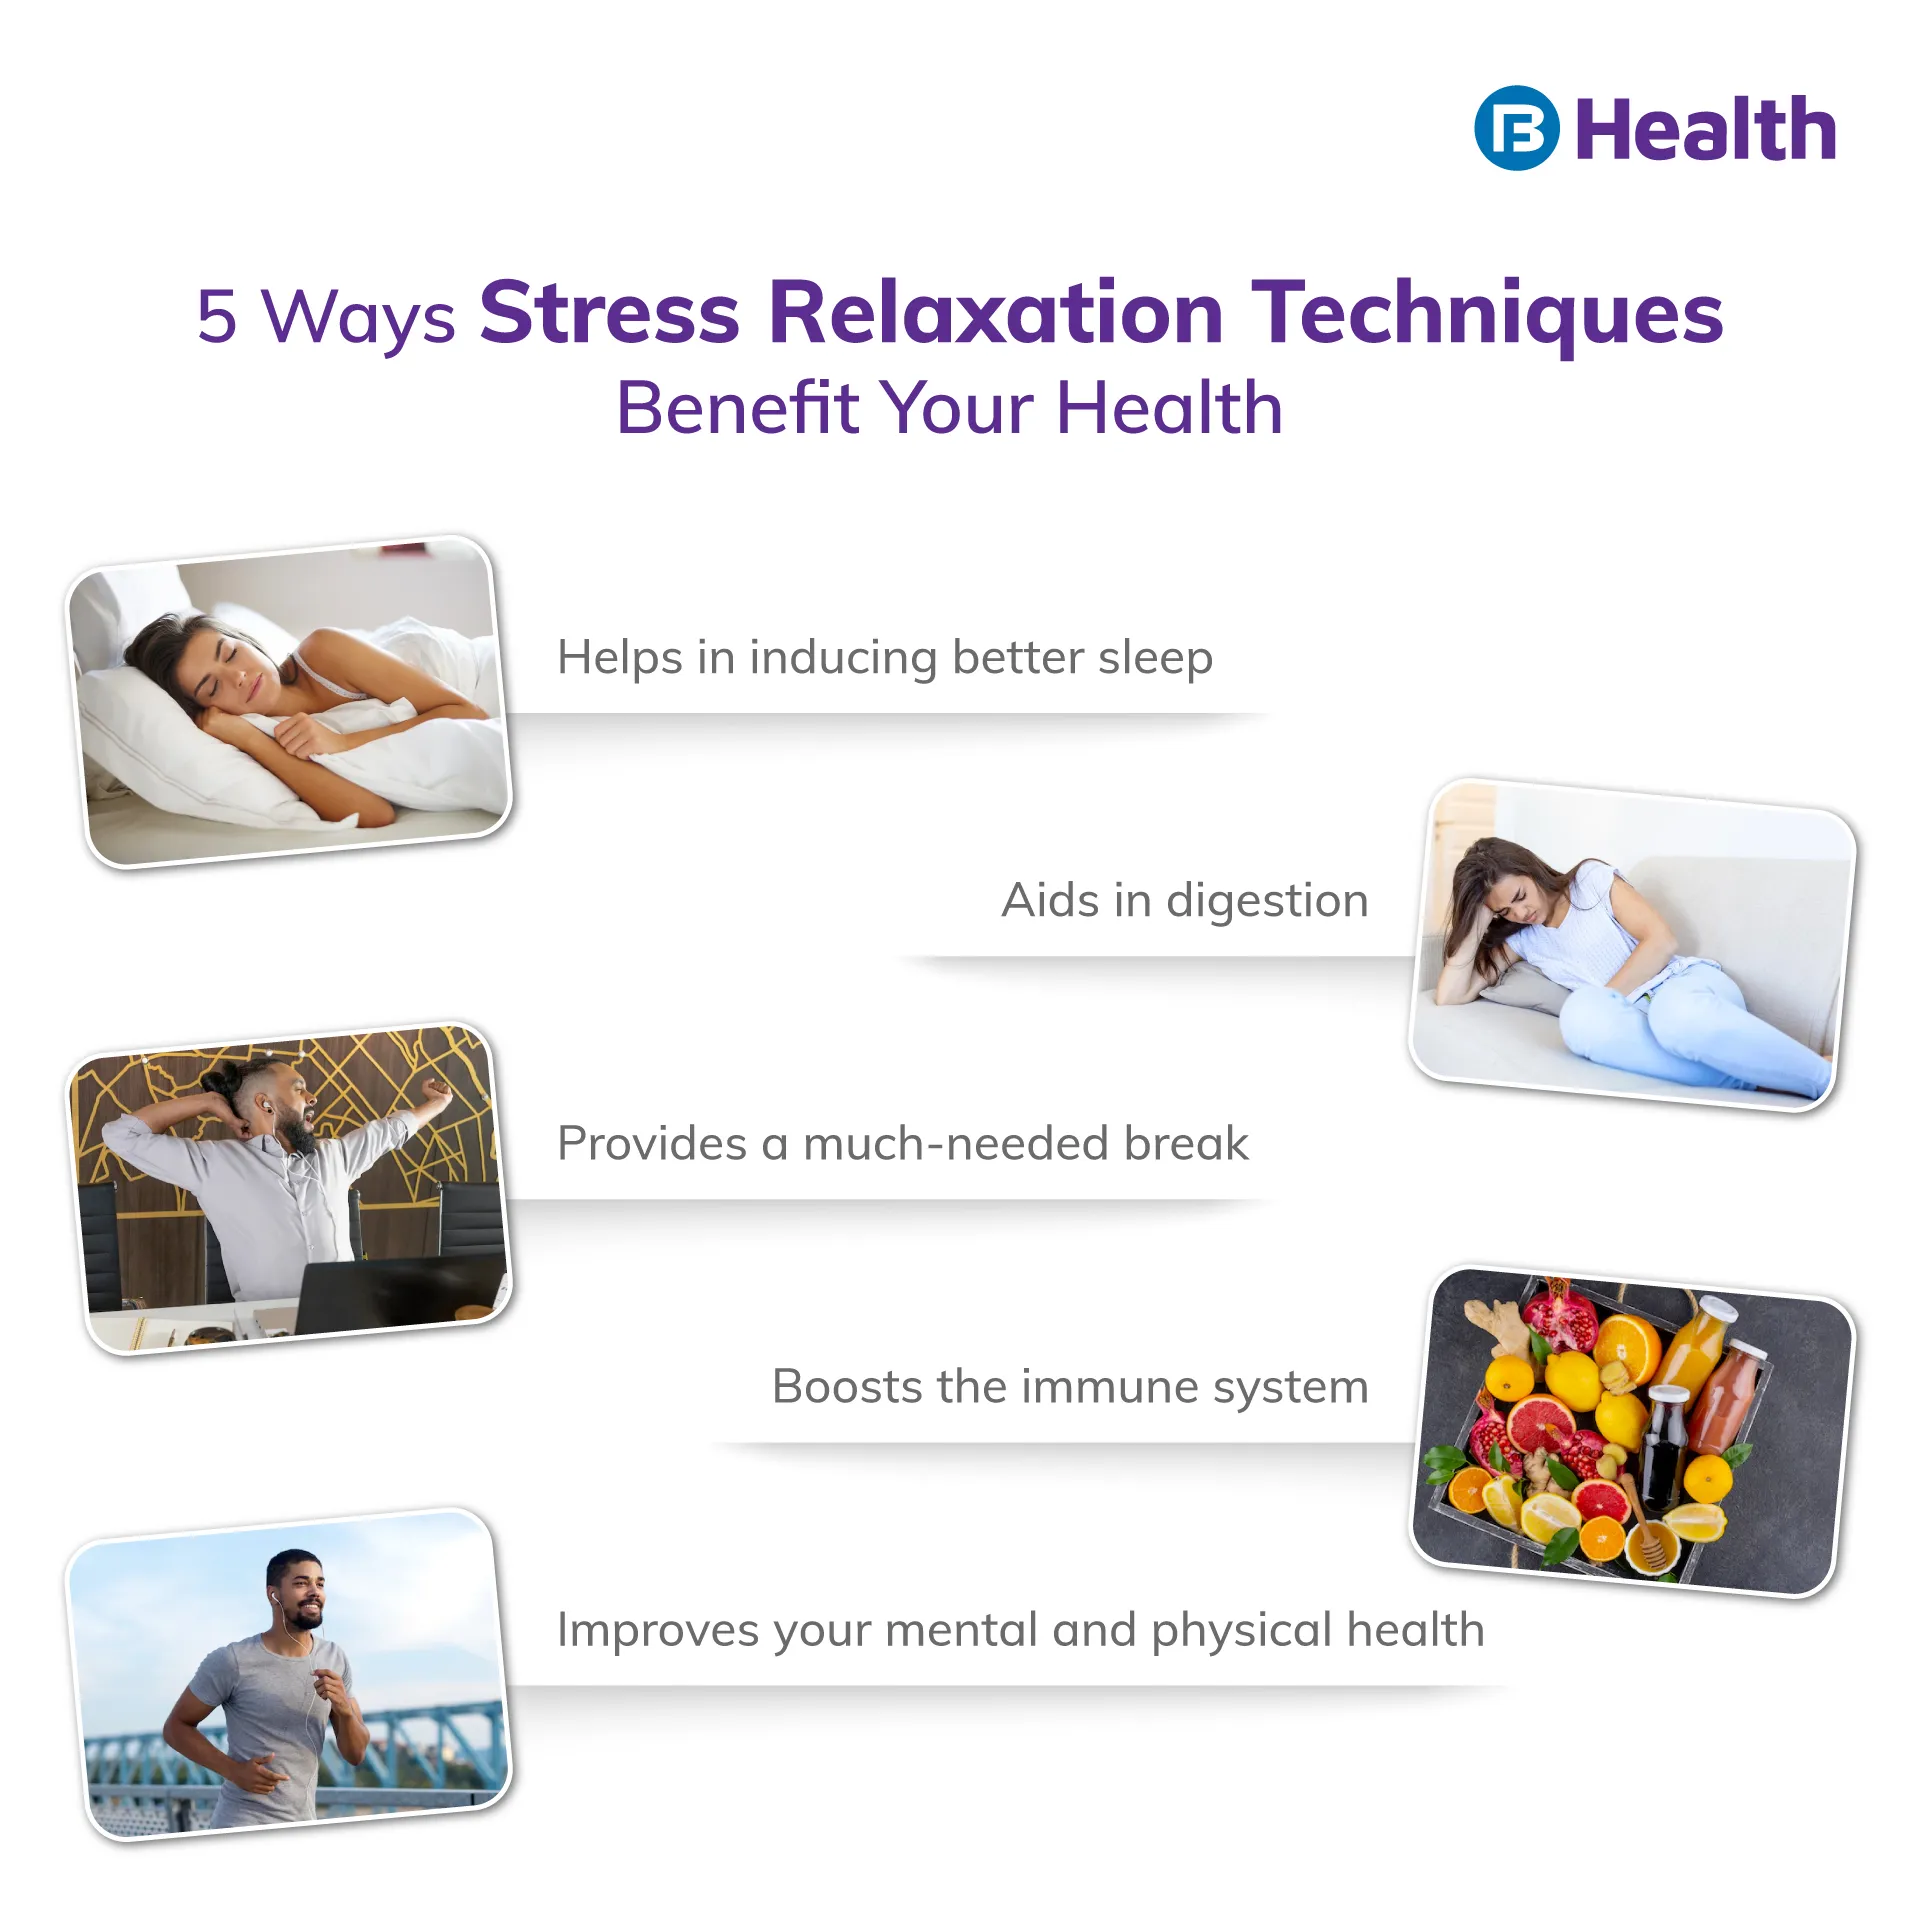 Relaxation Techniques to Reduce Stress